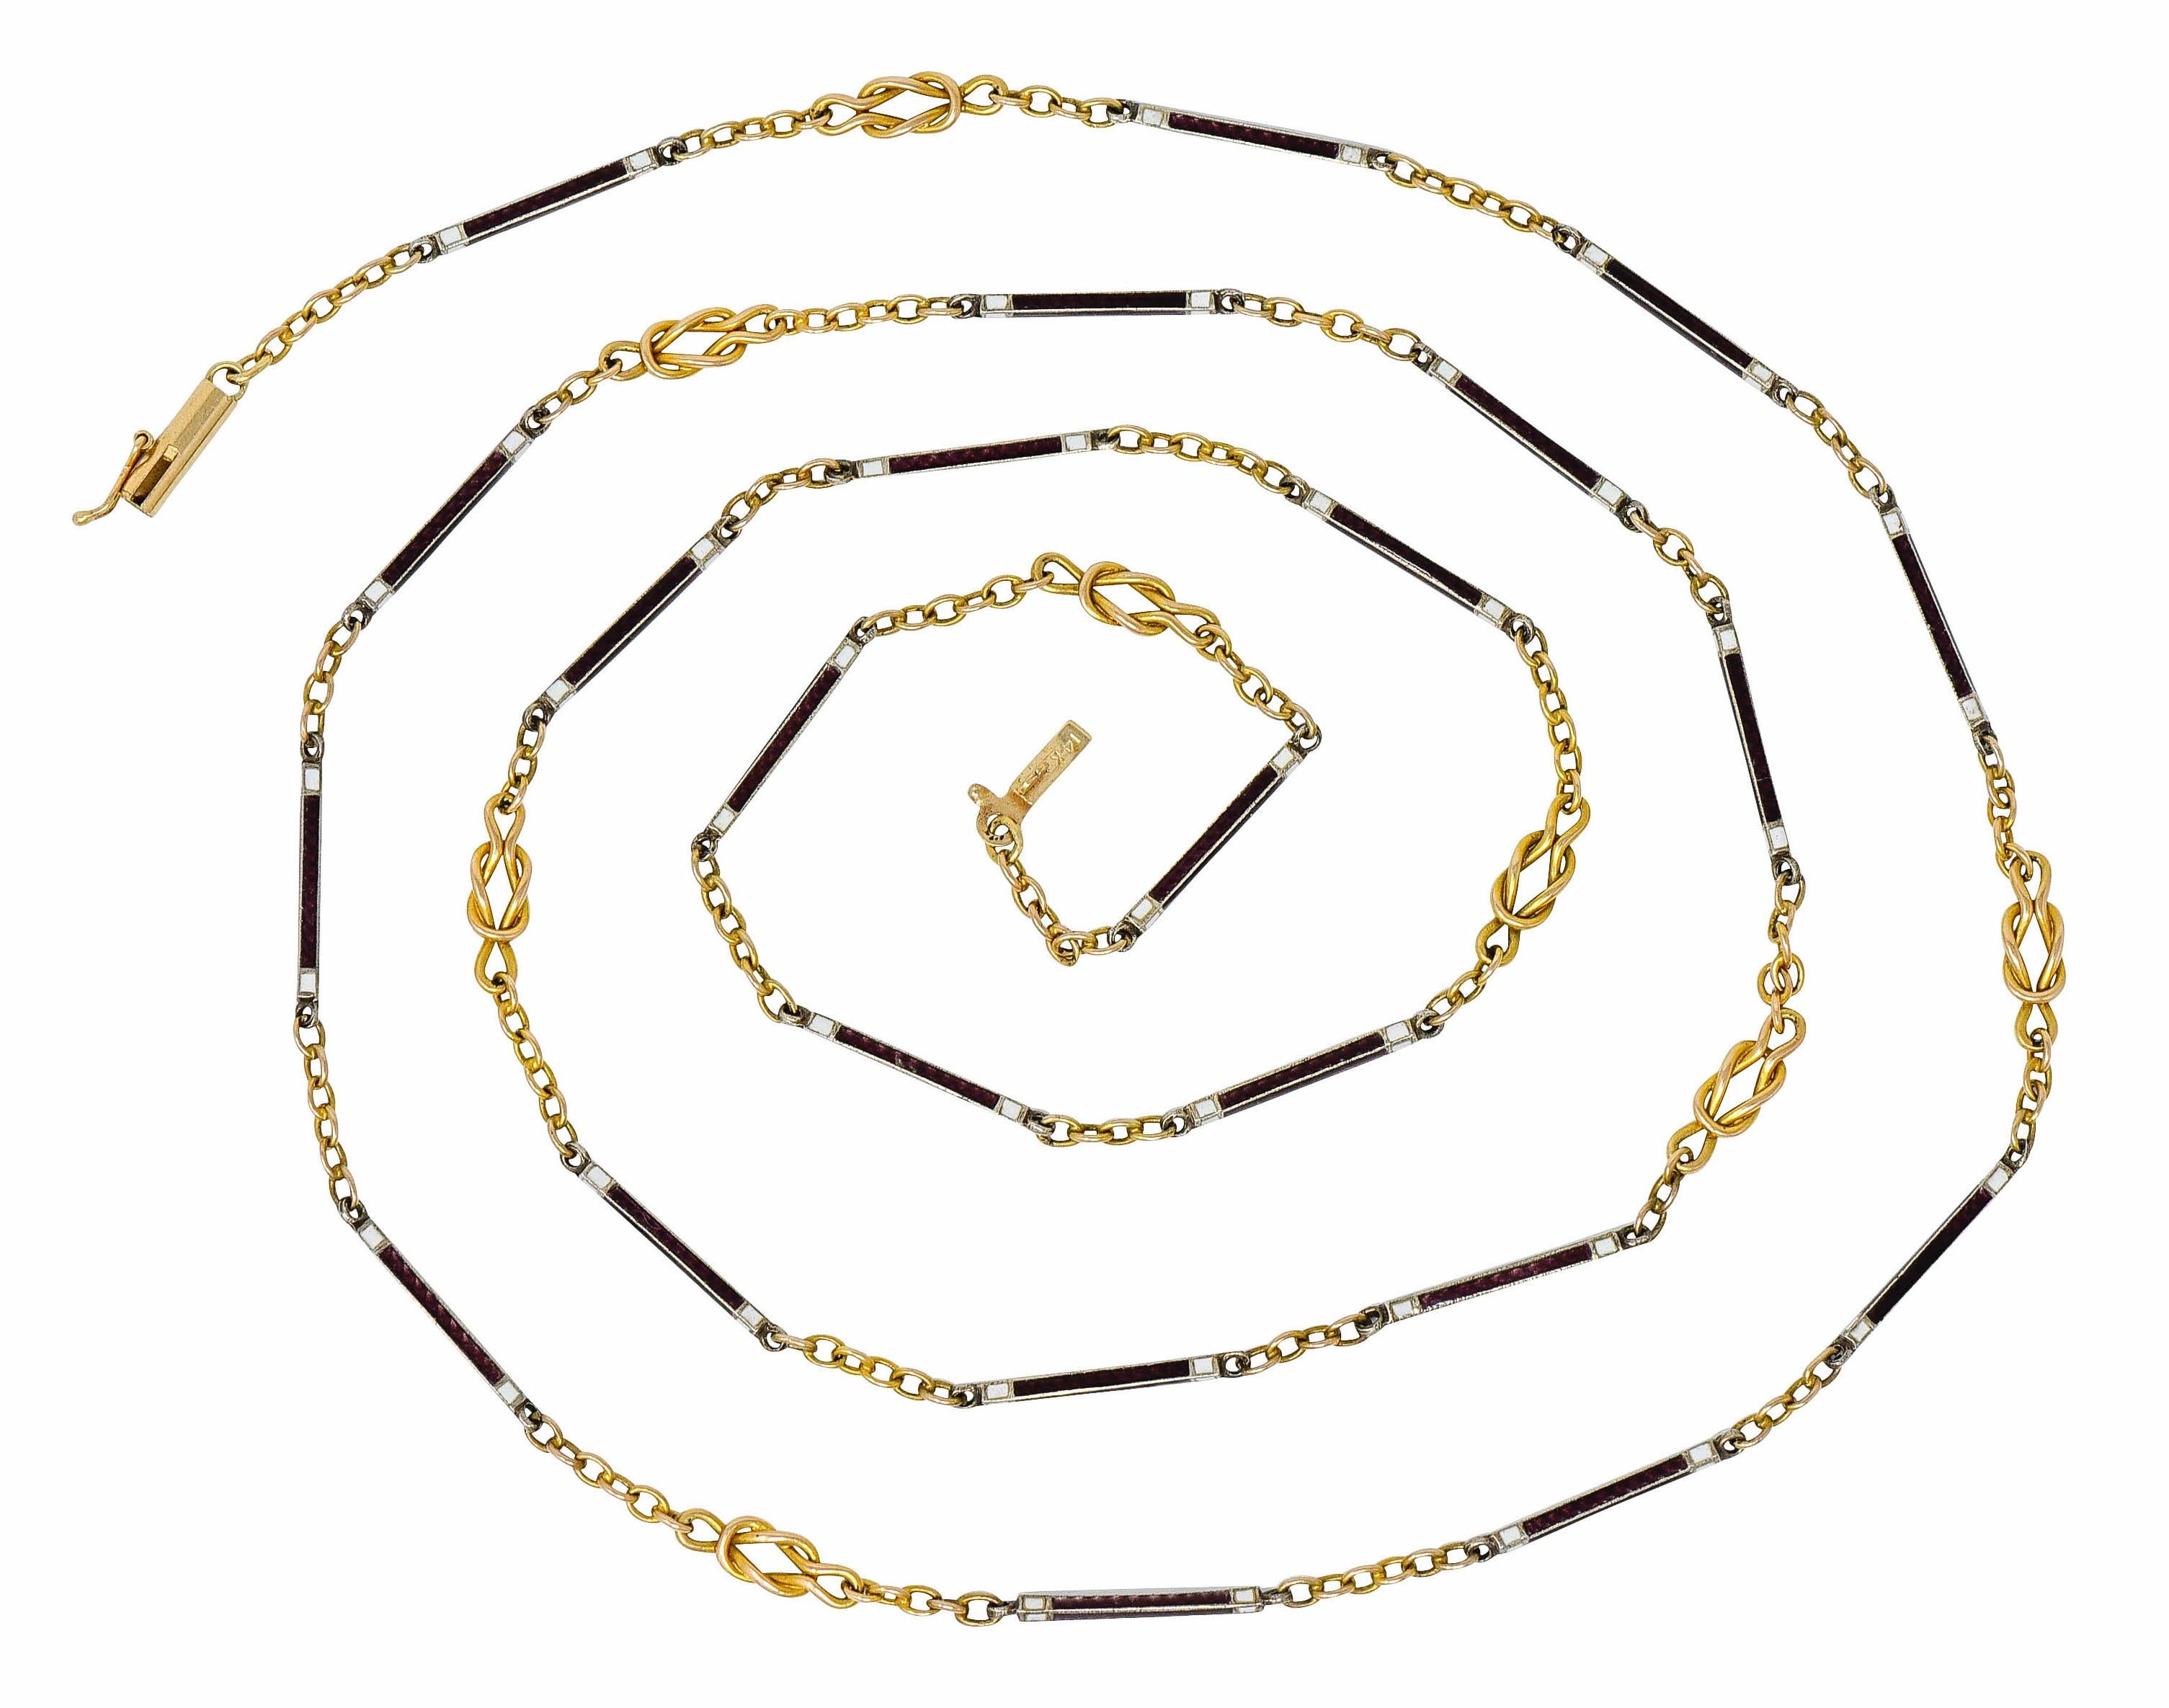 Long station style necklace featuring bar links glossed with burgundy and white enamel; exhibiting very little loss

Alternating with twisted gold stations depicting a looped sailor's reef knot motif

Completed by cable chain spacer links and